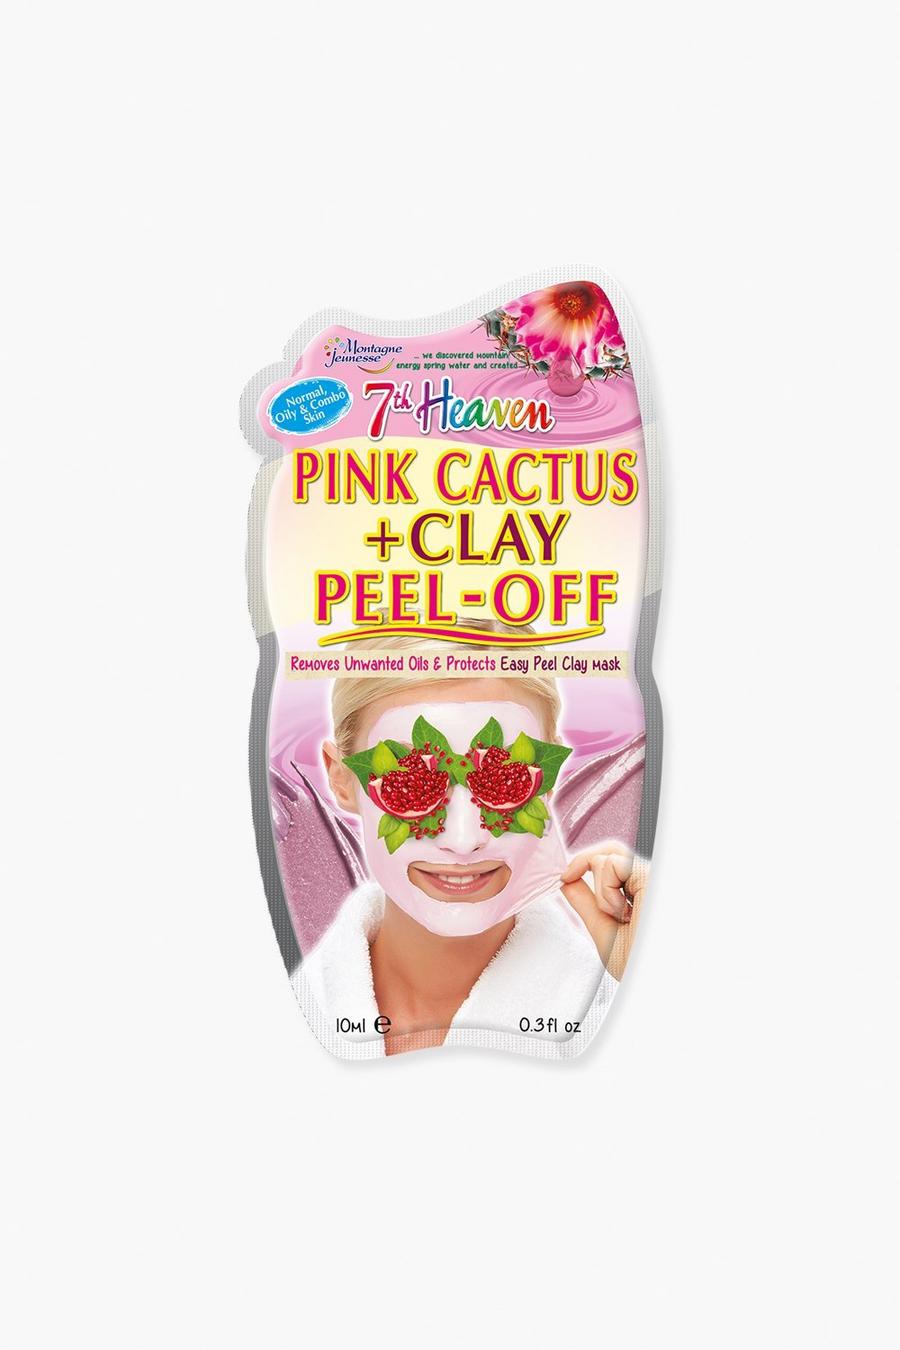 7th HEAVEN PINK CACTUS AND VLAY PEEL OFF MASK 